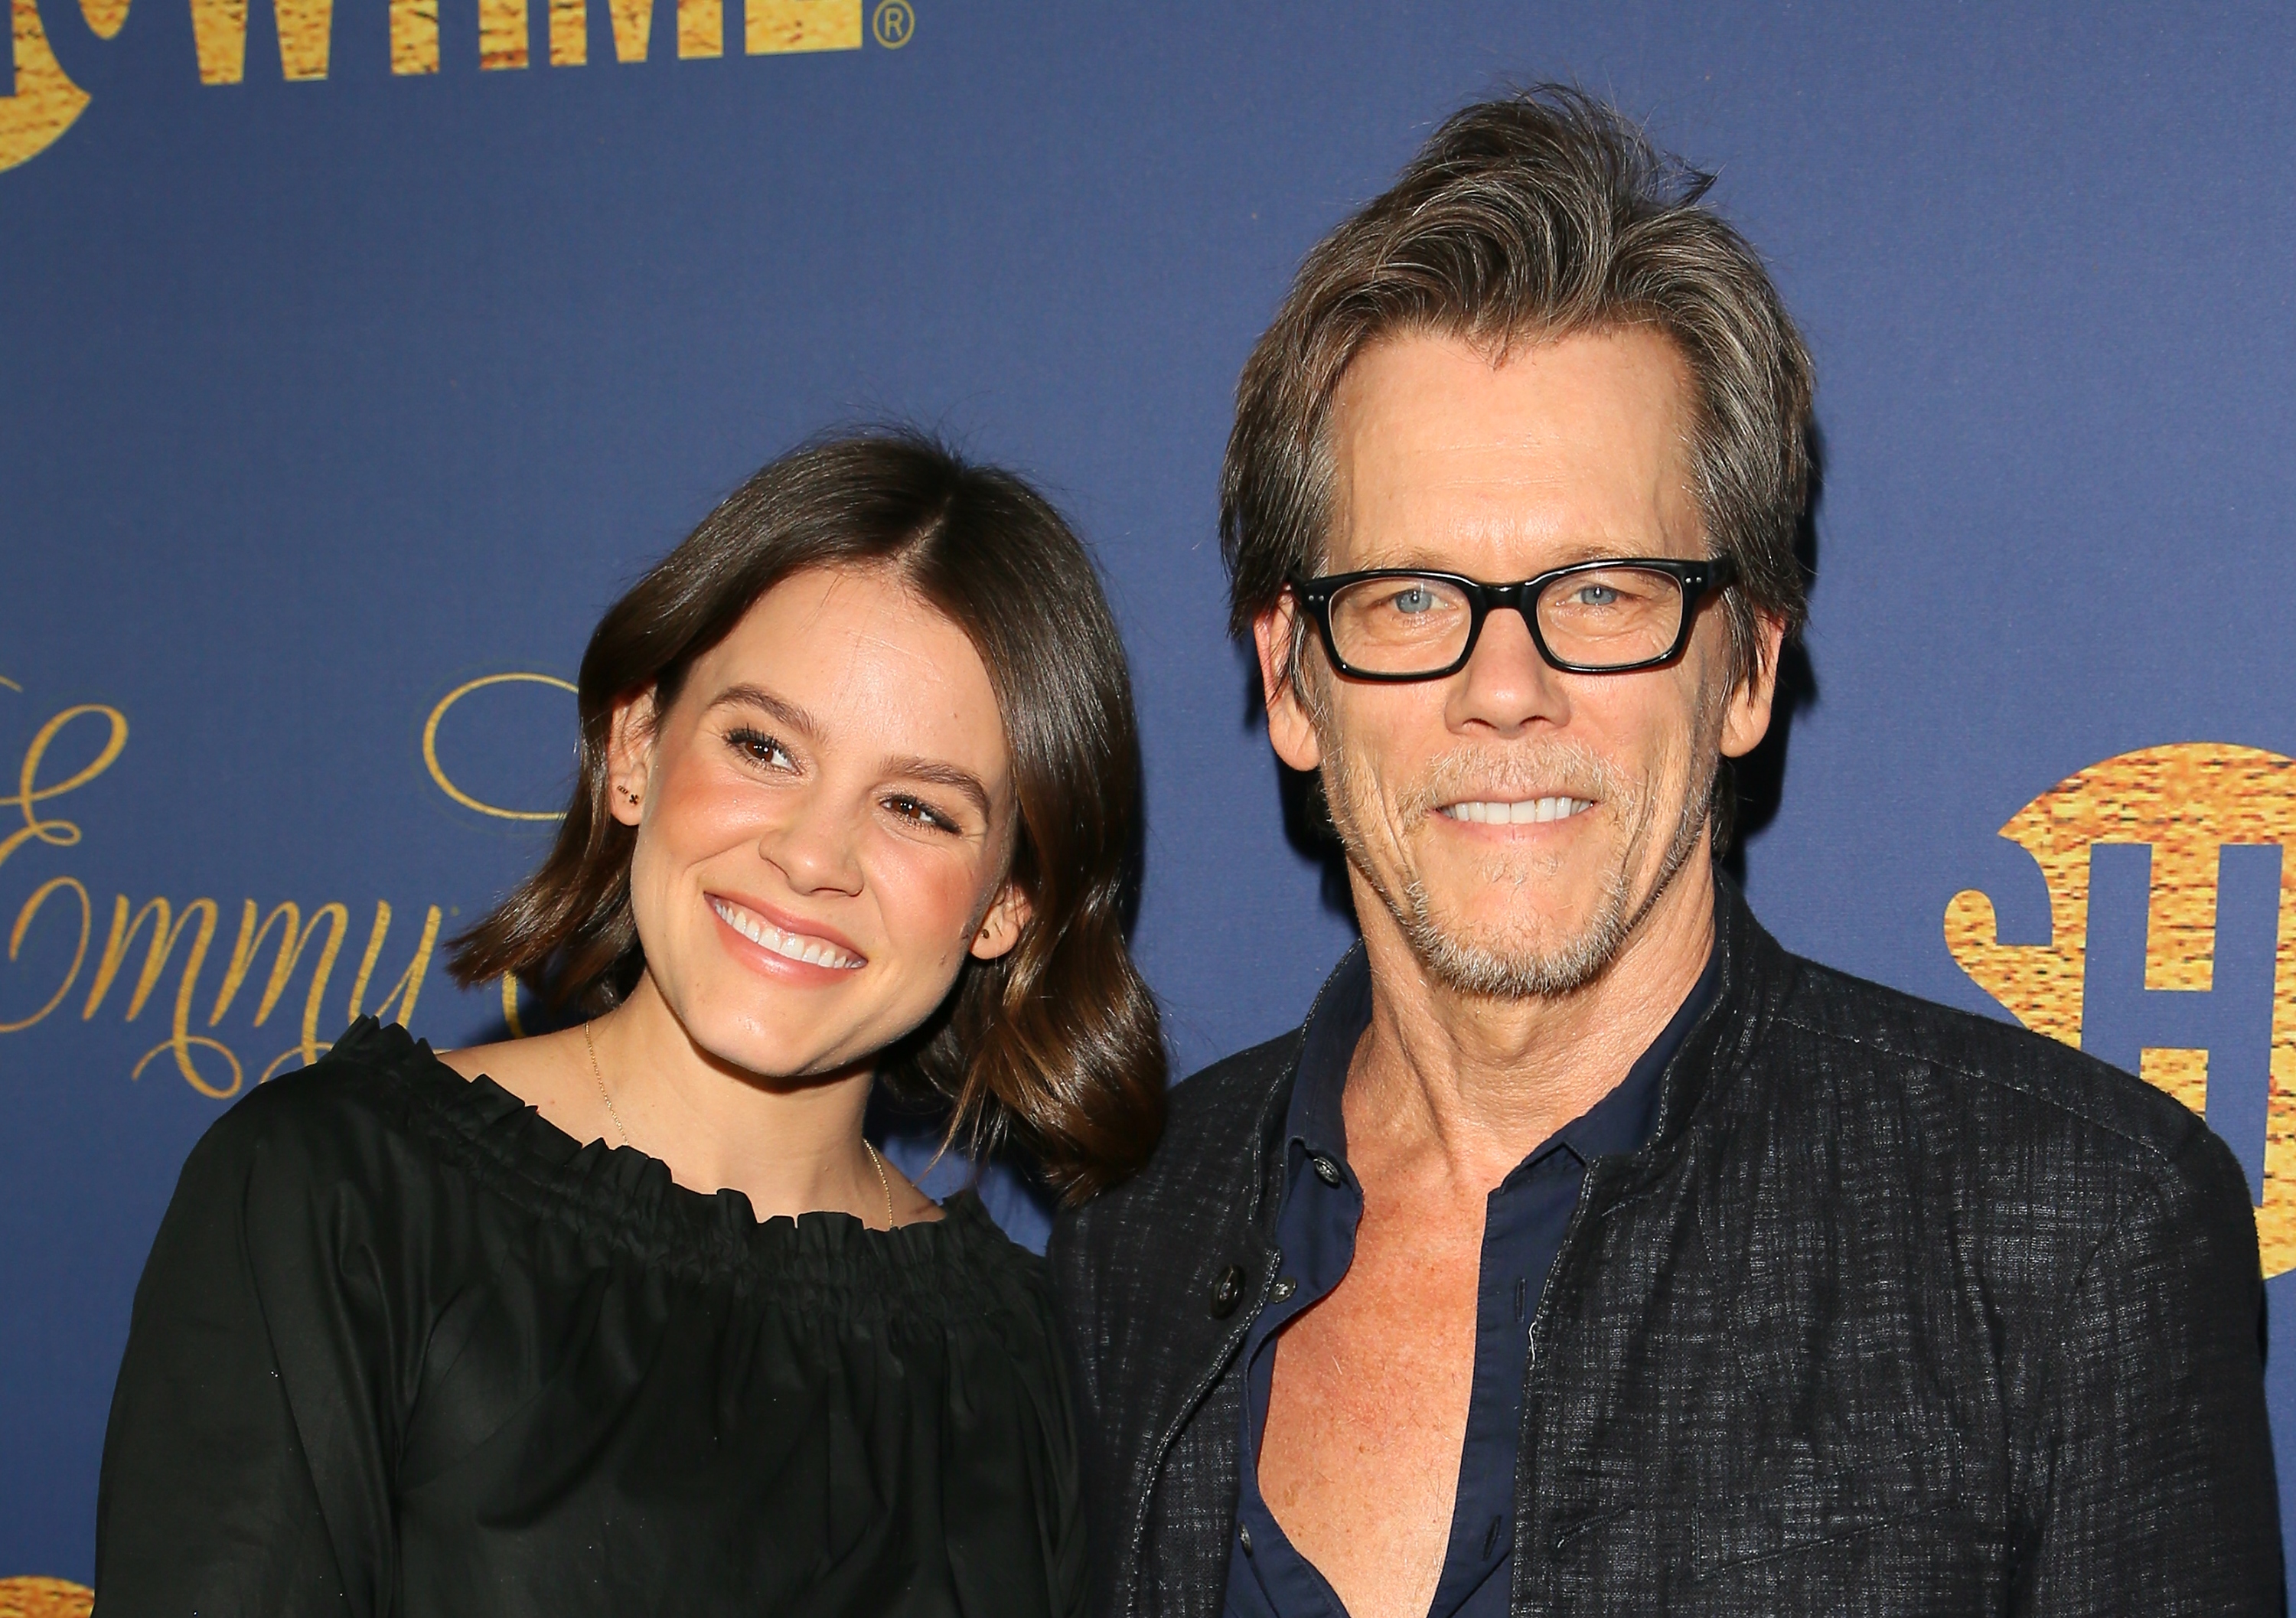 Kevin Bacon and Sosie Bacon at the Showtime Emmy eve nominees celebration in Los Angeles, California, on September 16, 2018. | Source: Getty Images